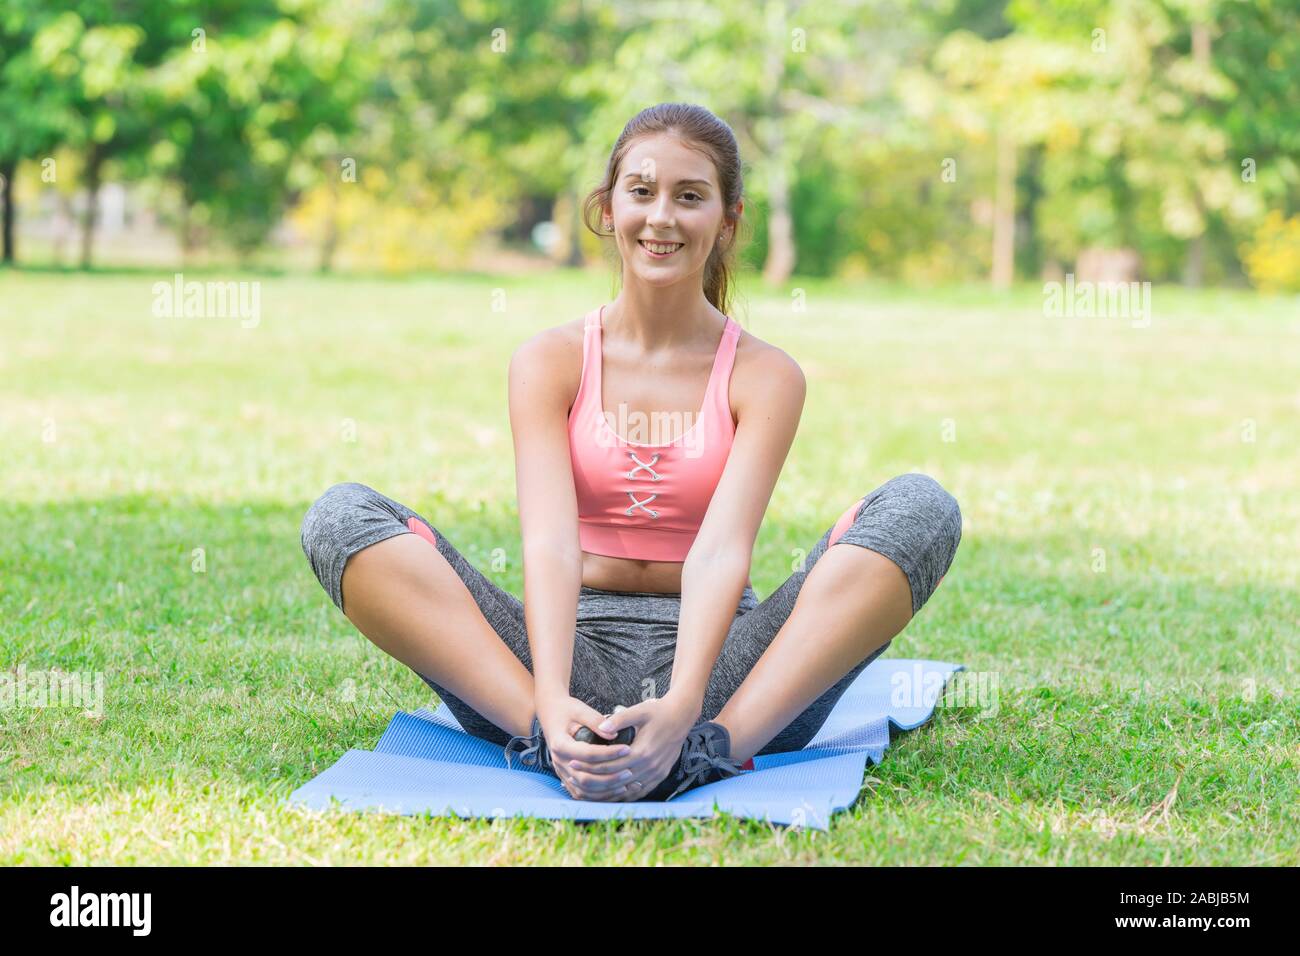 cute young healthy sport teen sitting smiling on yoga mat outdoor park garden. Stock Photo